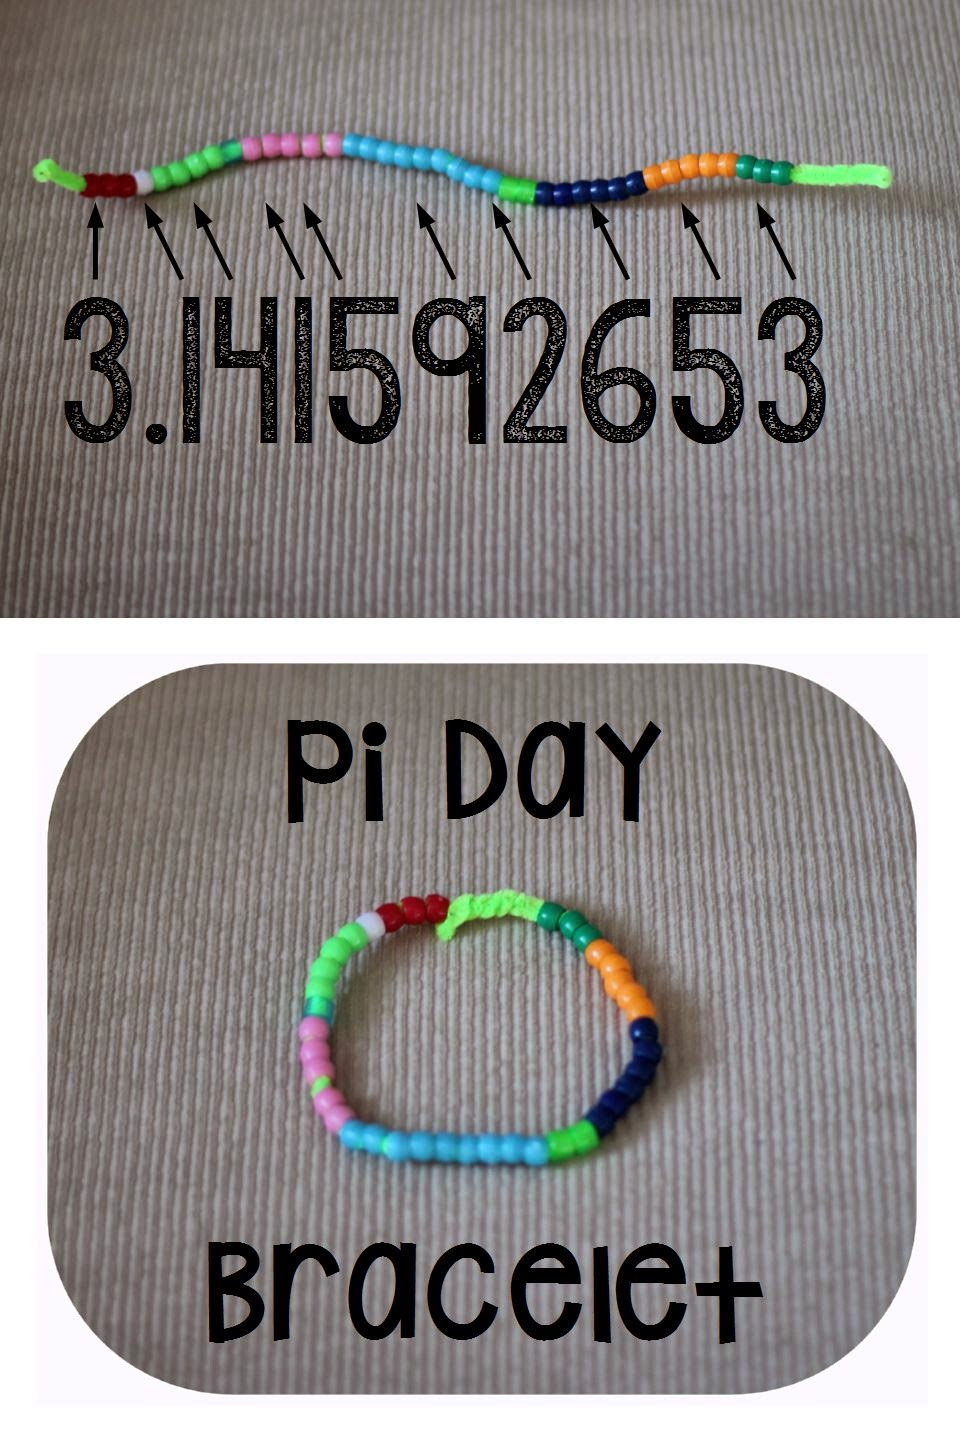 Pi Day Project Ideas For School
 Pi Day is on its way Pi Day Activities momgineer